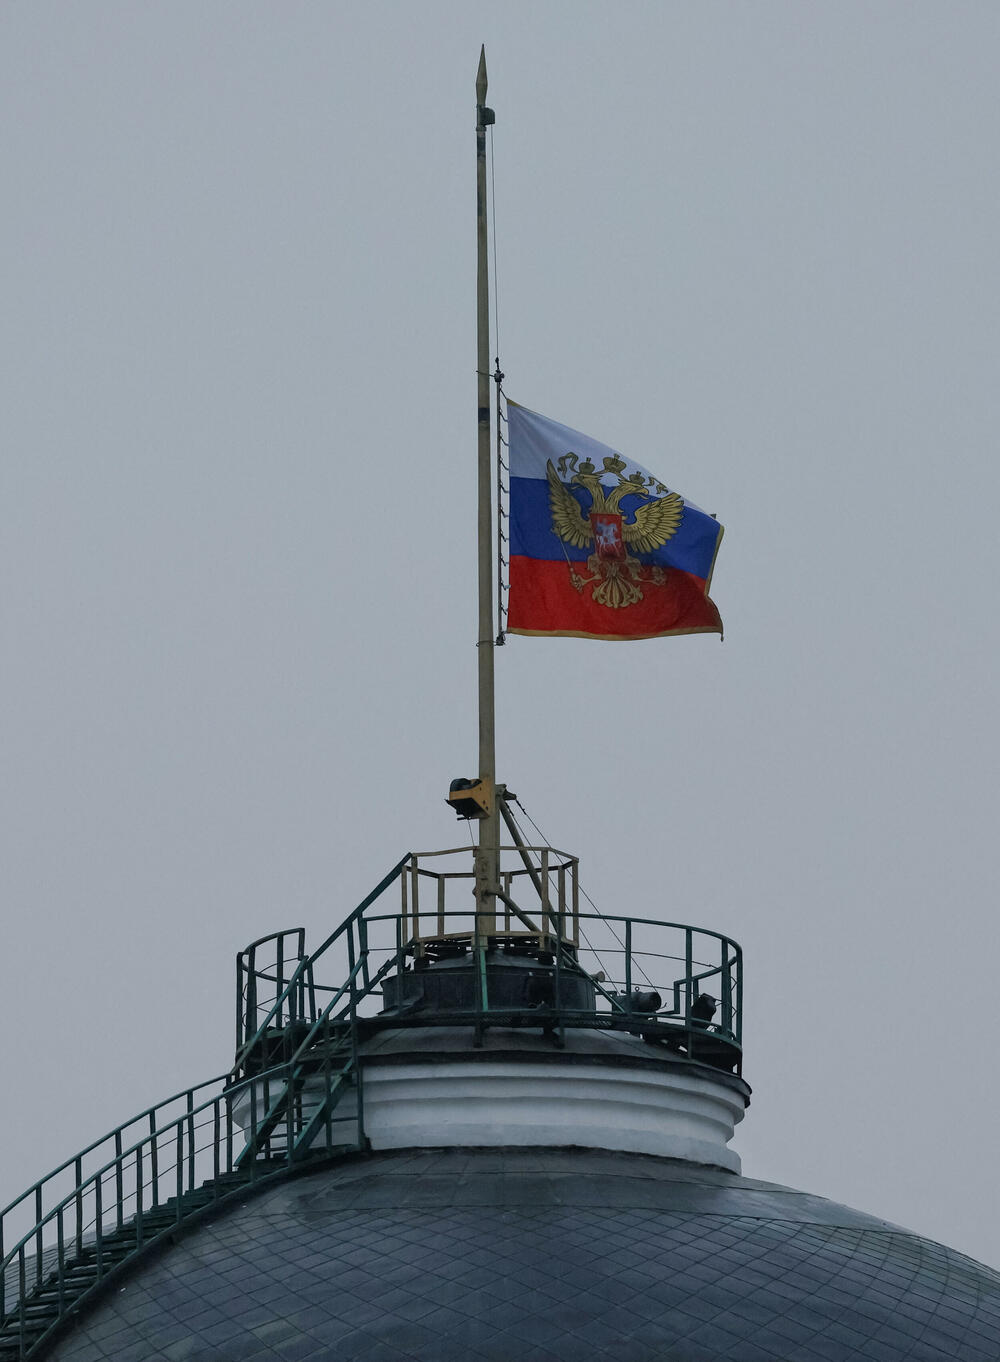 Flags were flown at half-mast, entertainment events were canceled, and advertising and broadcasting of entertainment programs on TV channels was suspended.